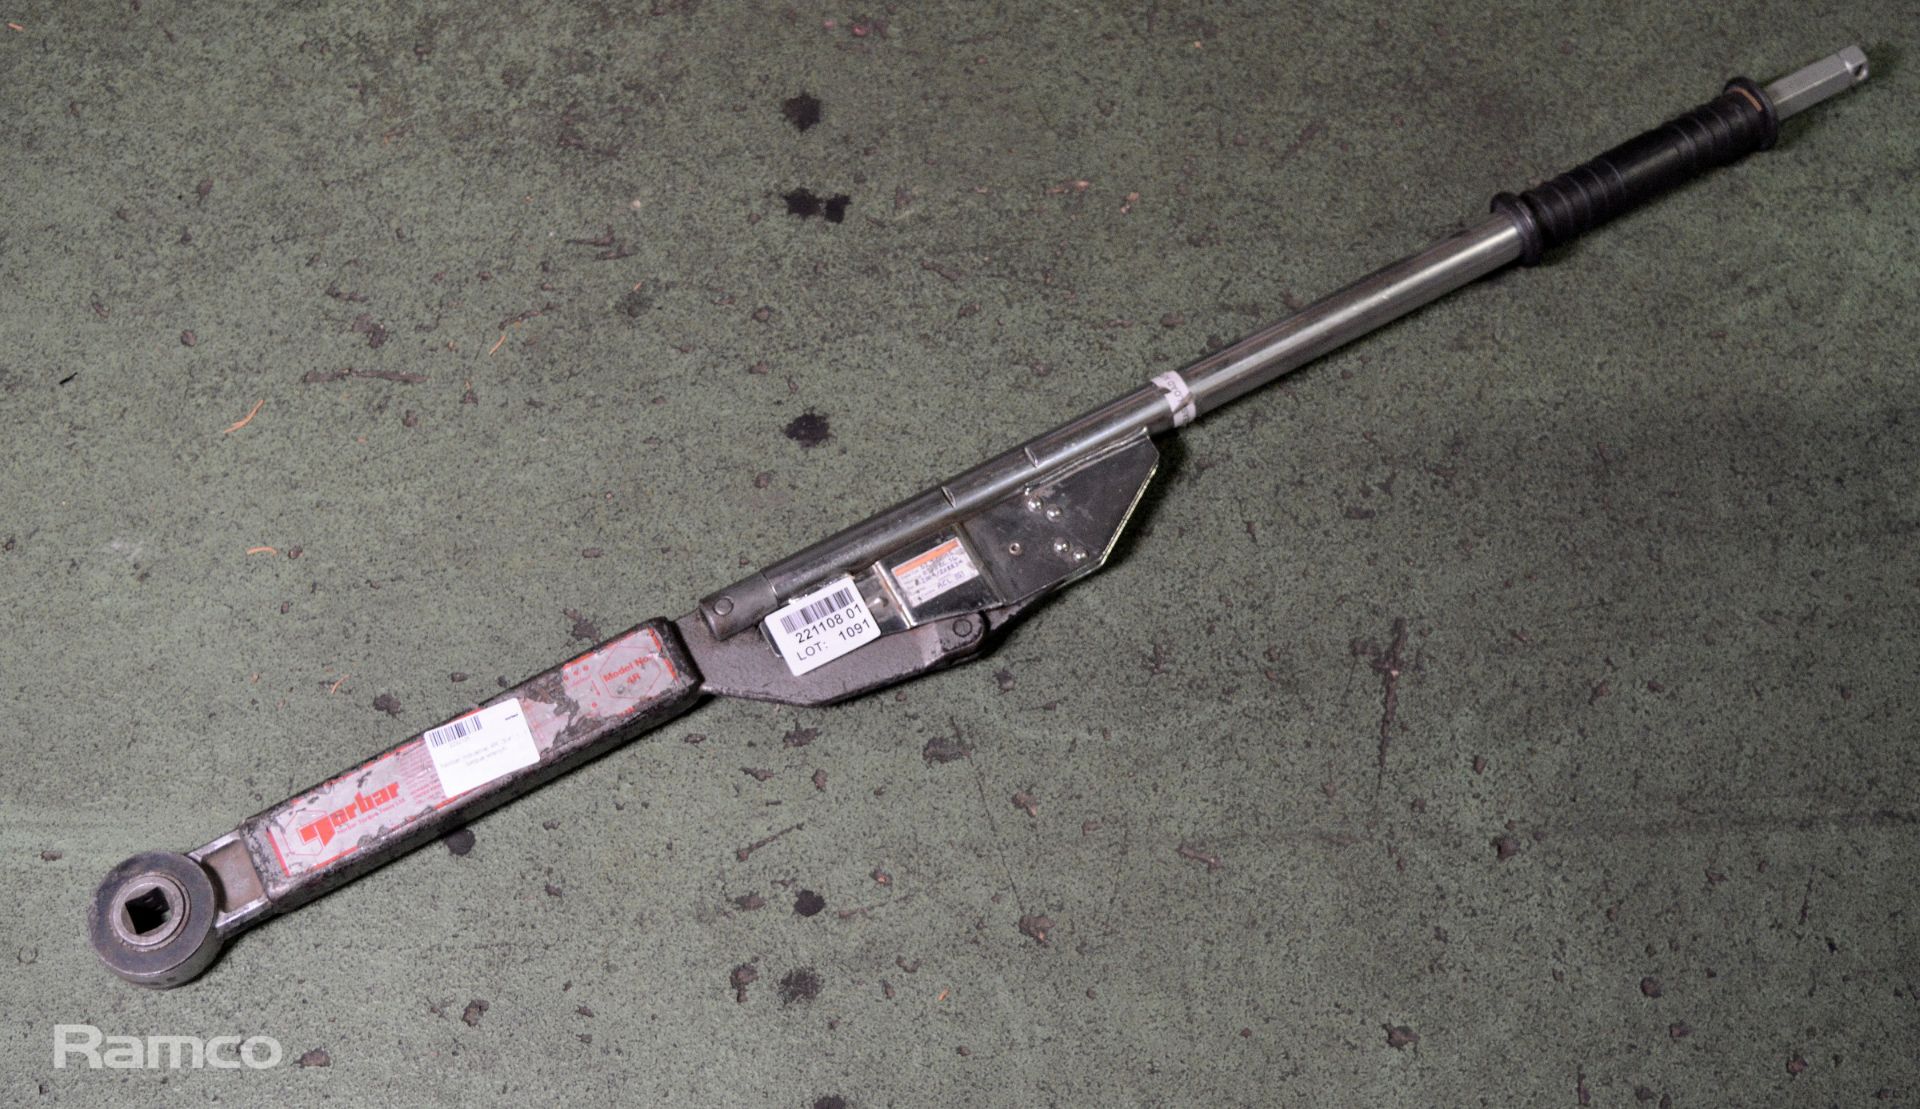 Norbar Industrial 4R, 3/4" torque wrench